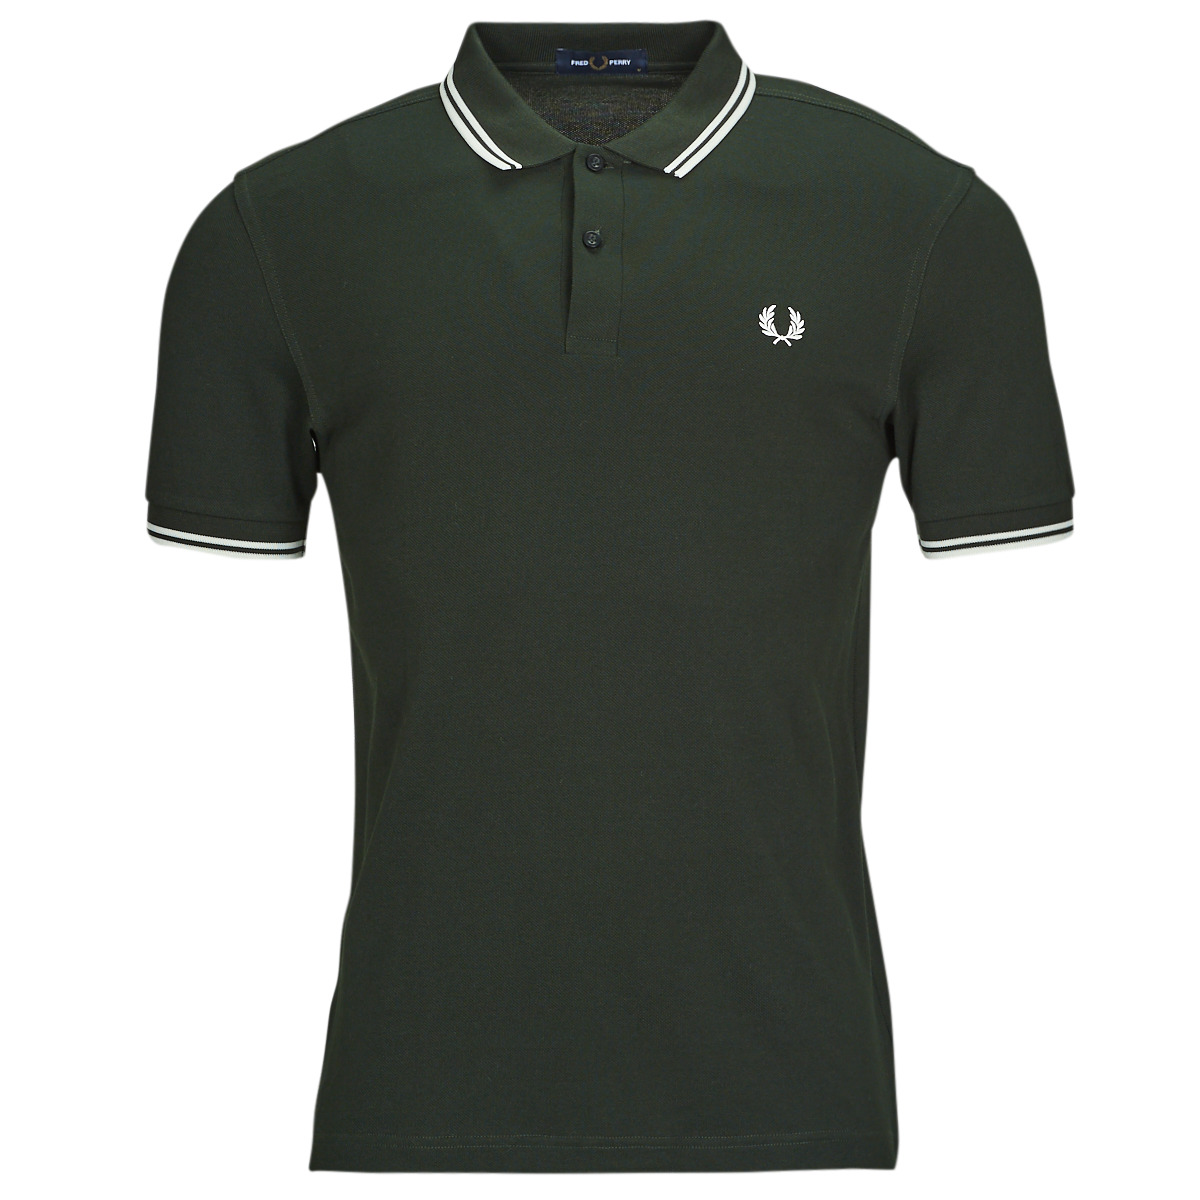 fred perry  twin tipped fred perry shirt  men's polo shirt in green